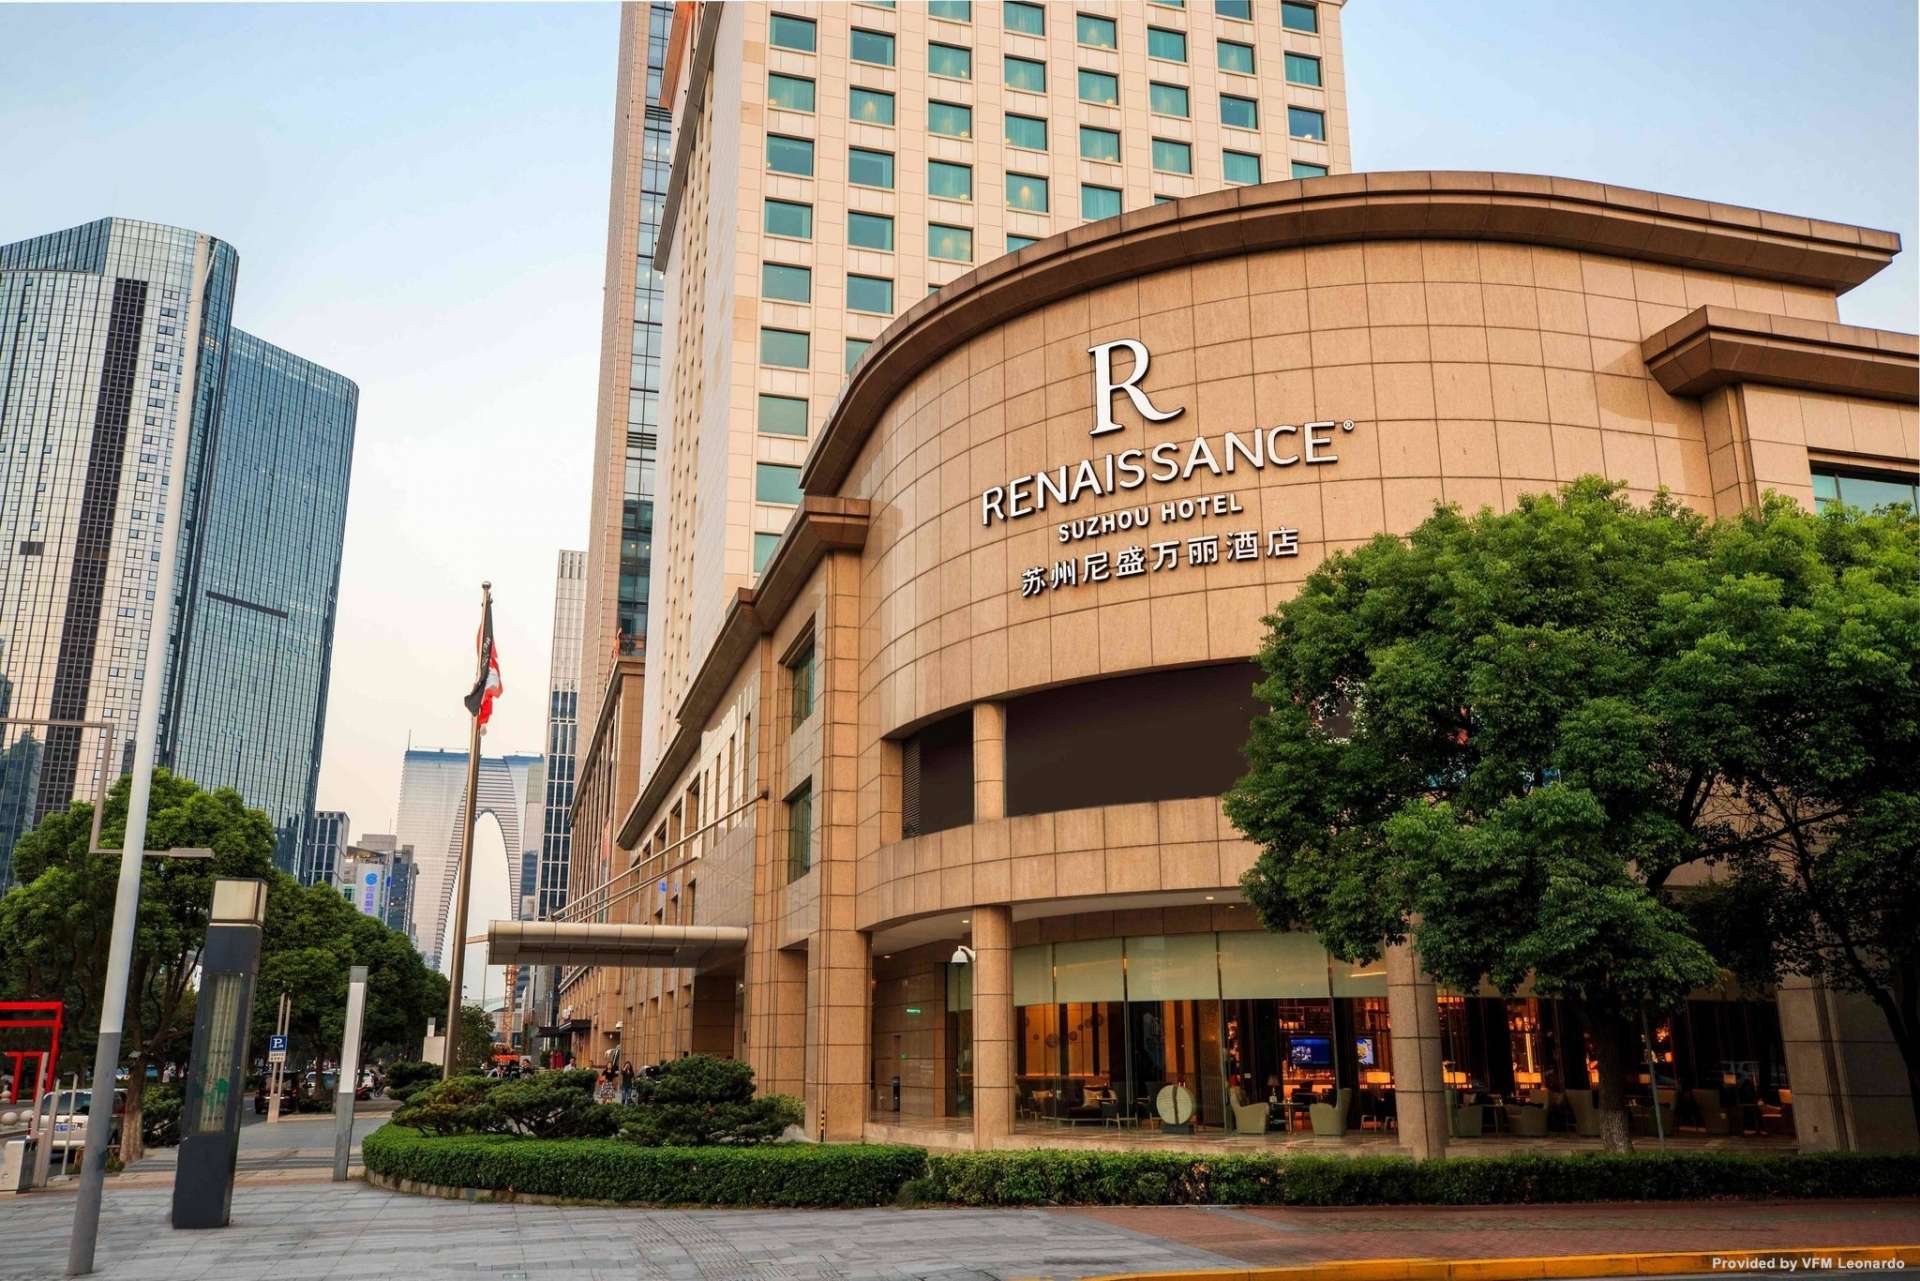 After purchasing Renaissance hotels, Marriott has grown into a global hospitality company.